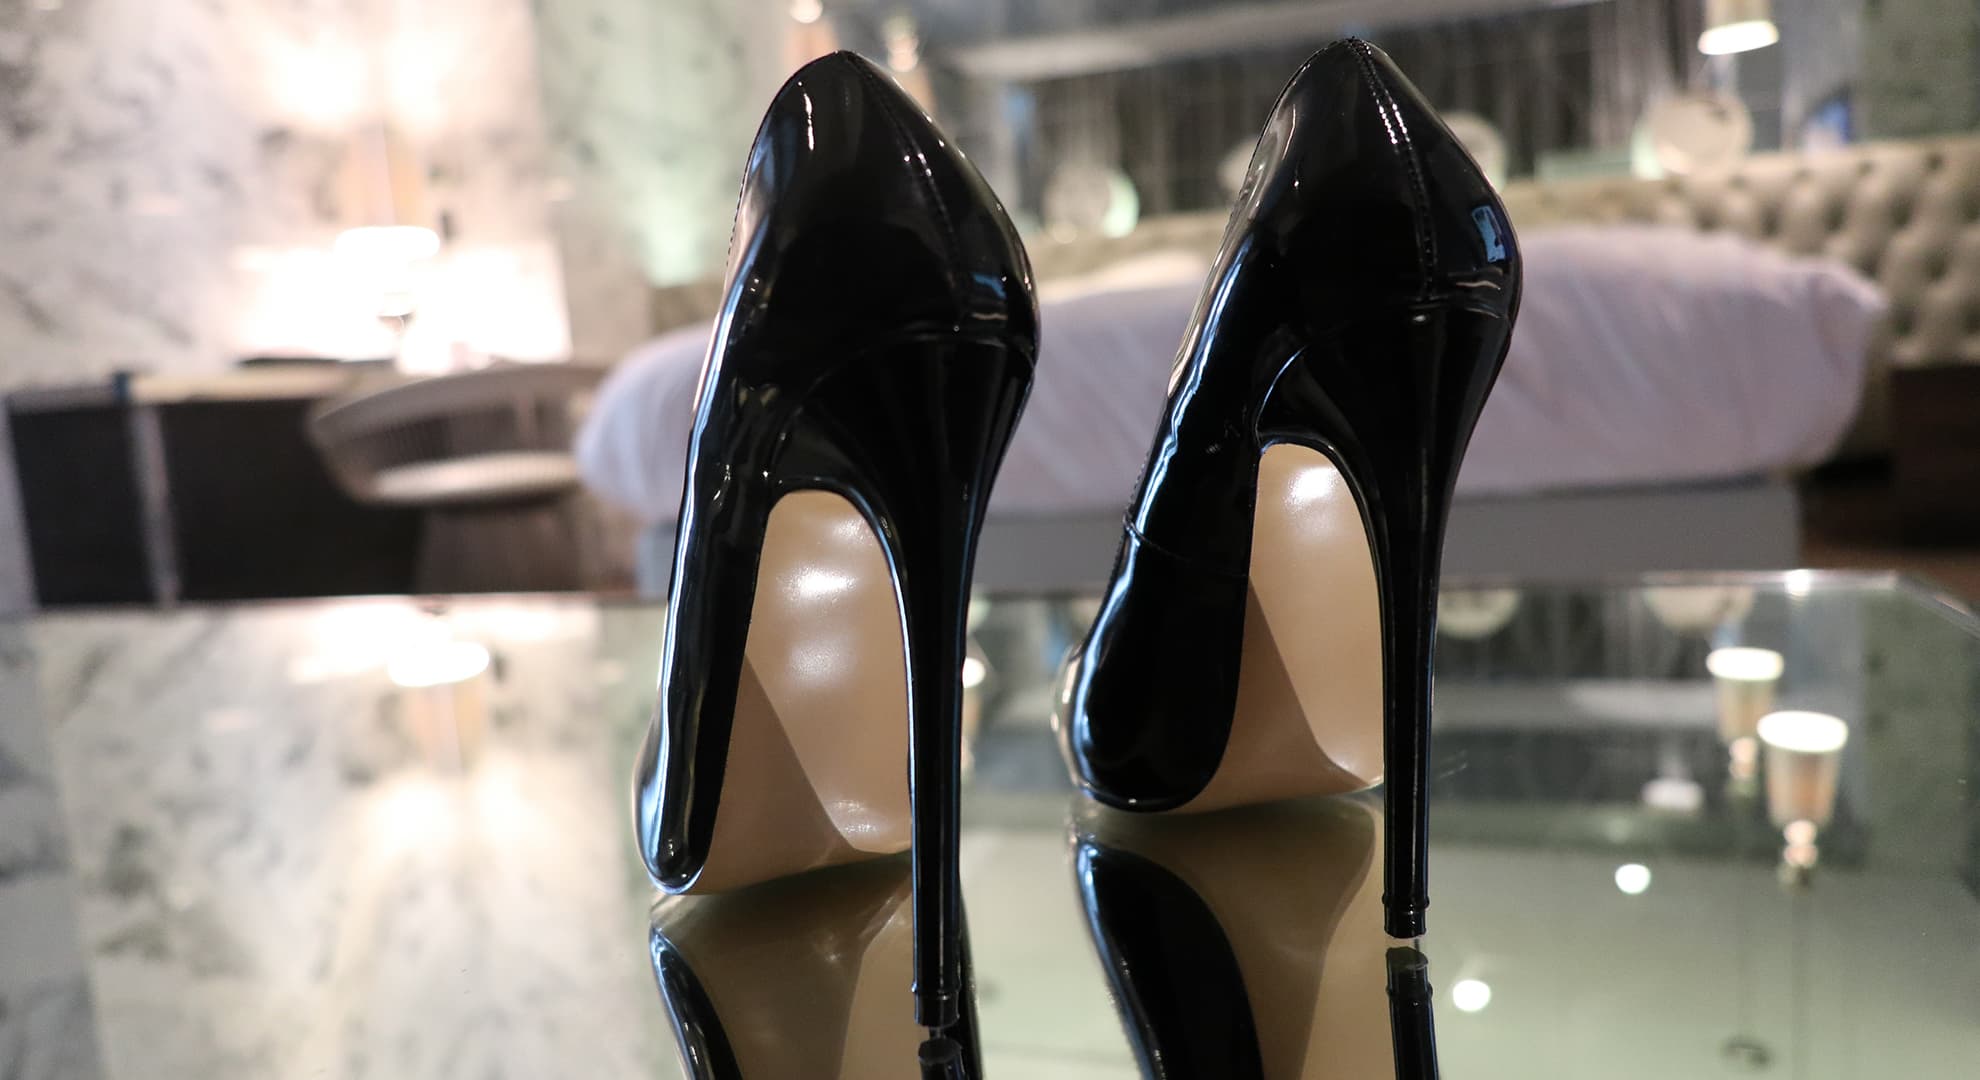 Image of stiletto shoes.